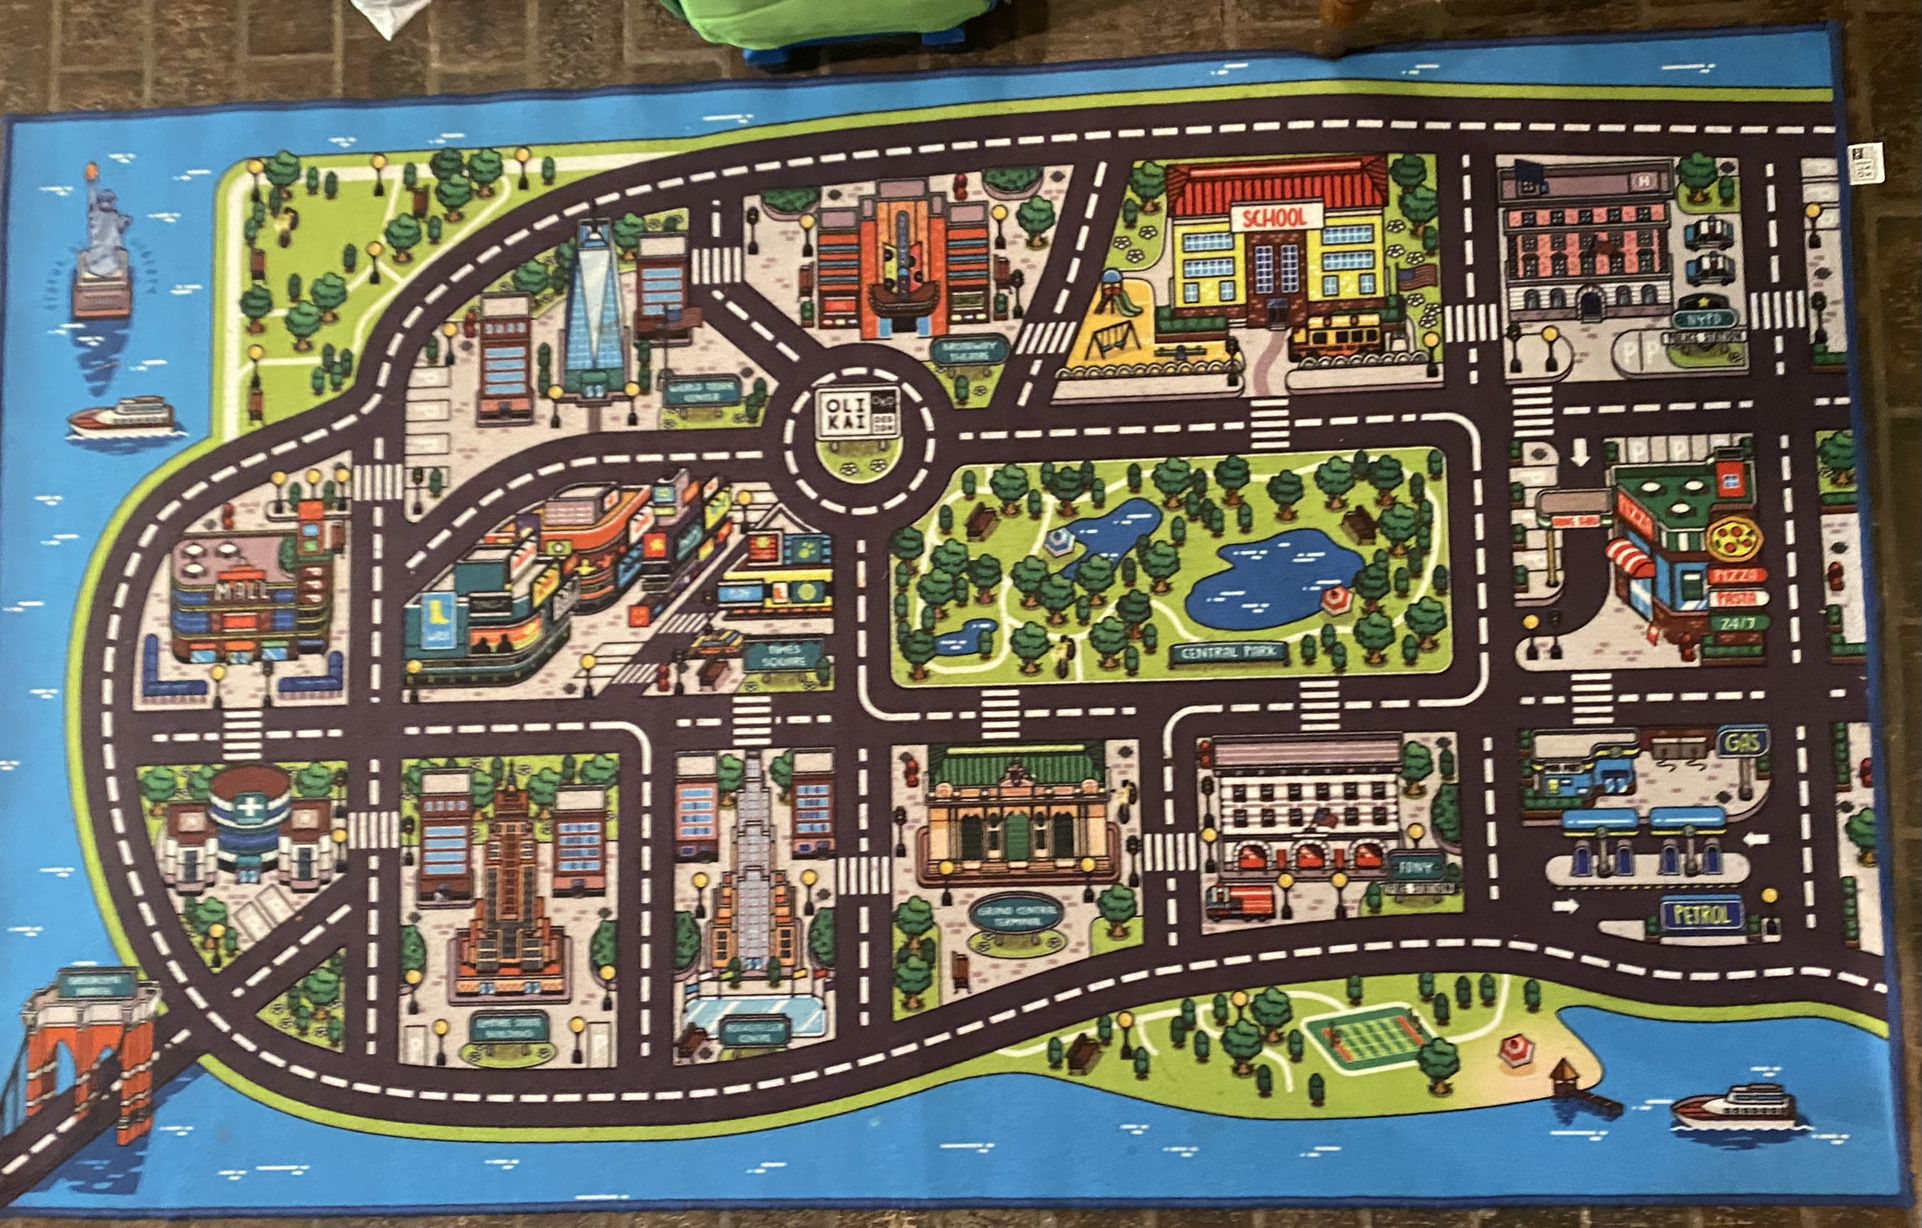 House Of Noa Toddler Play Mat - $75 for Sale in Seattle, WA - OfferUp